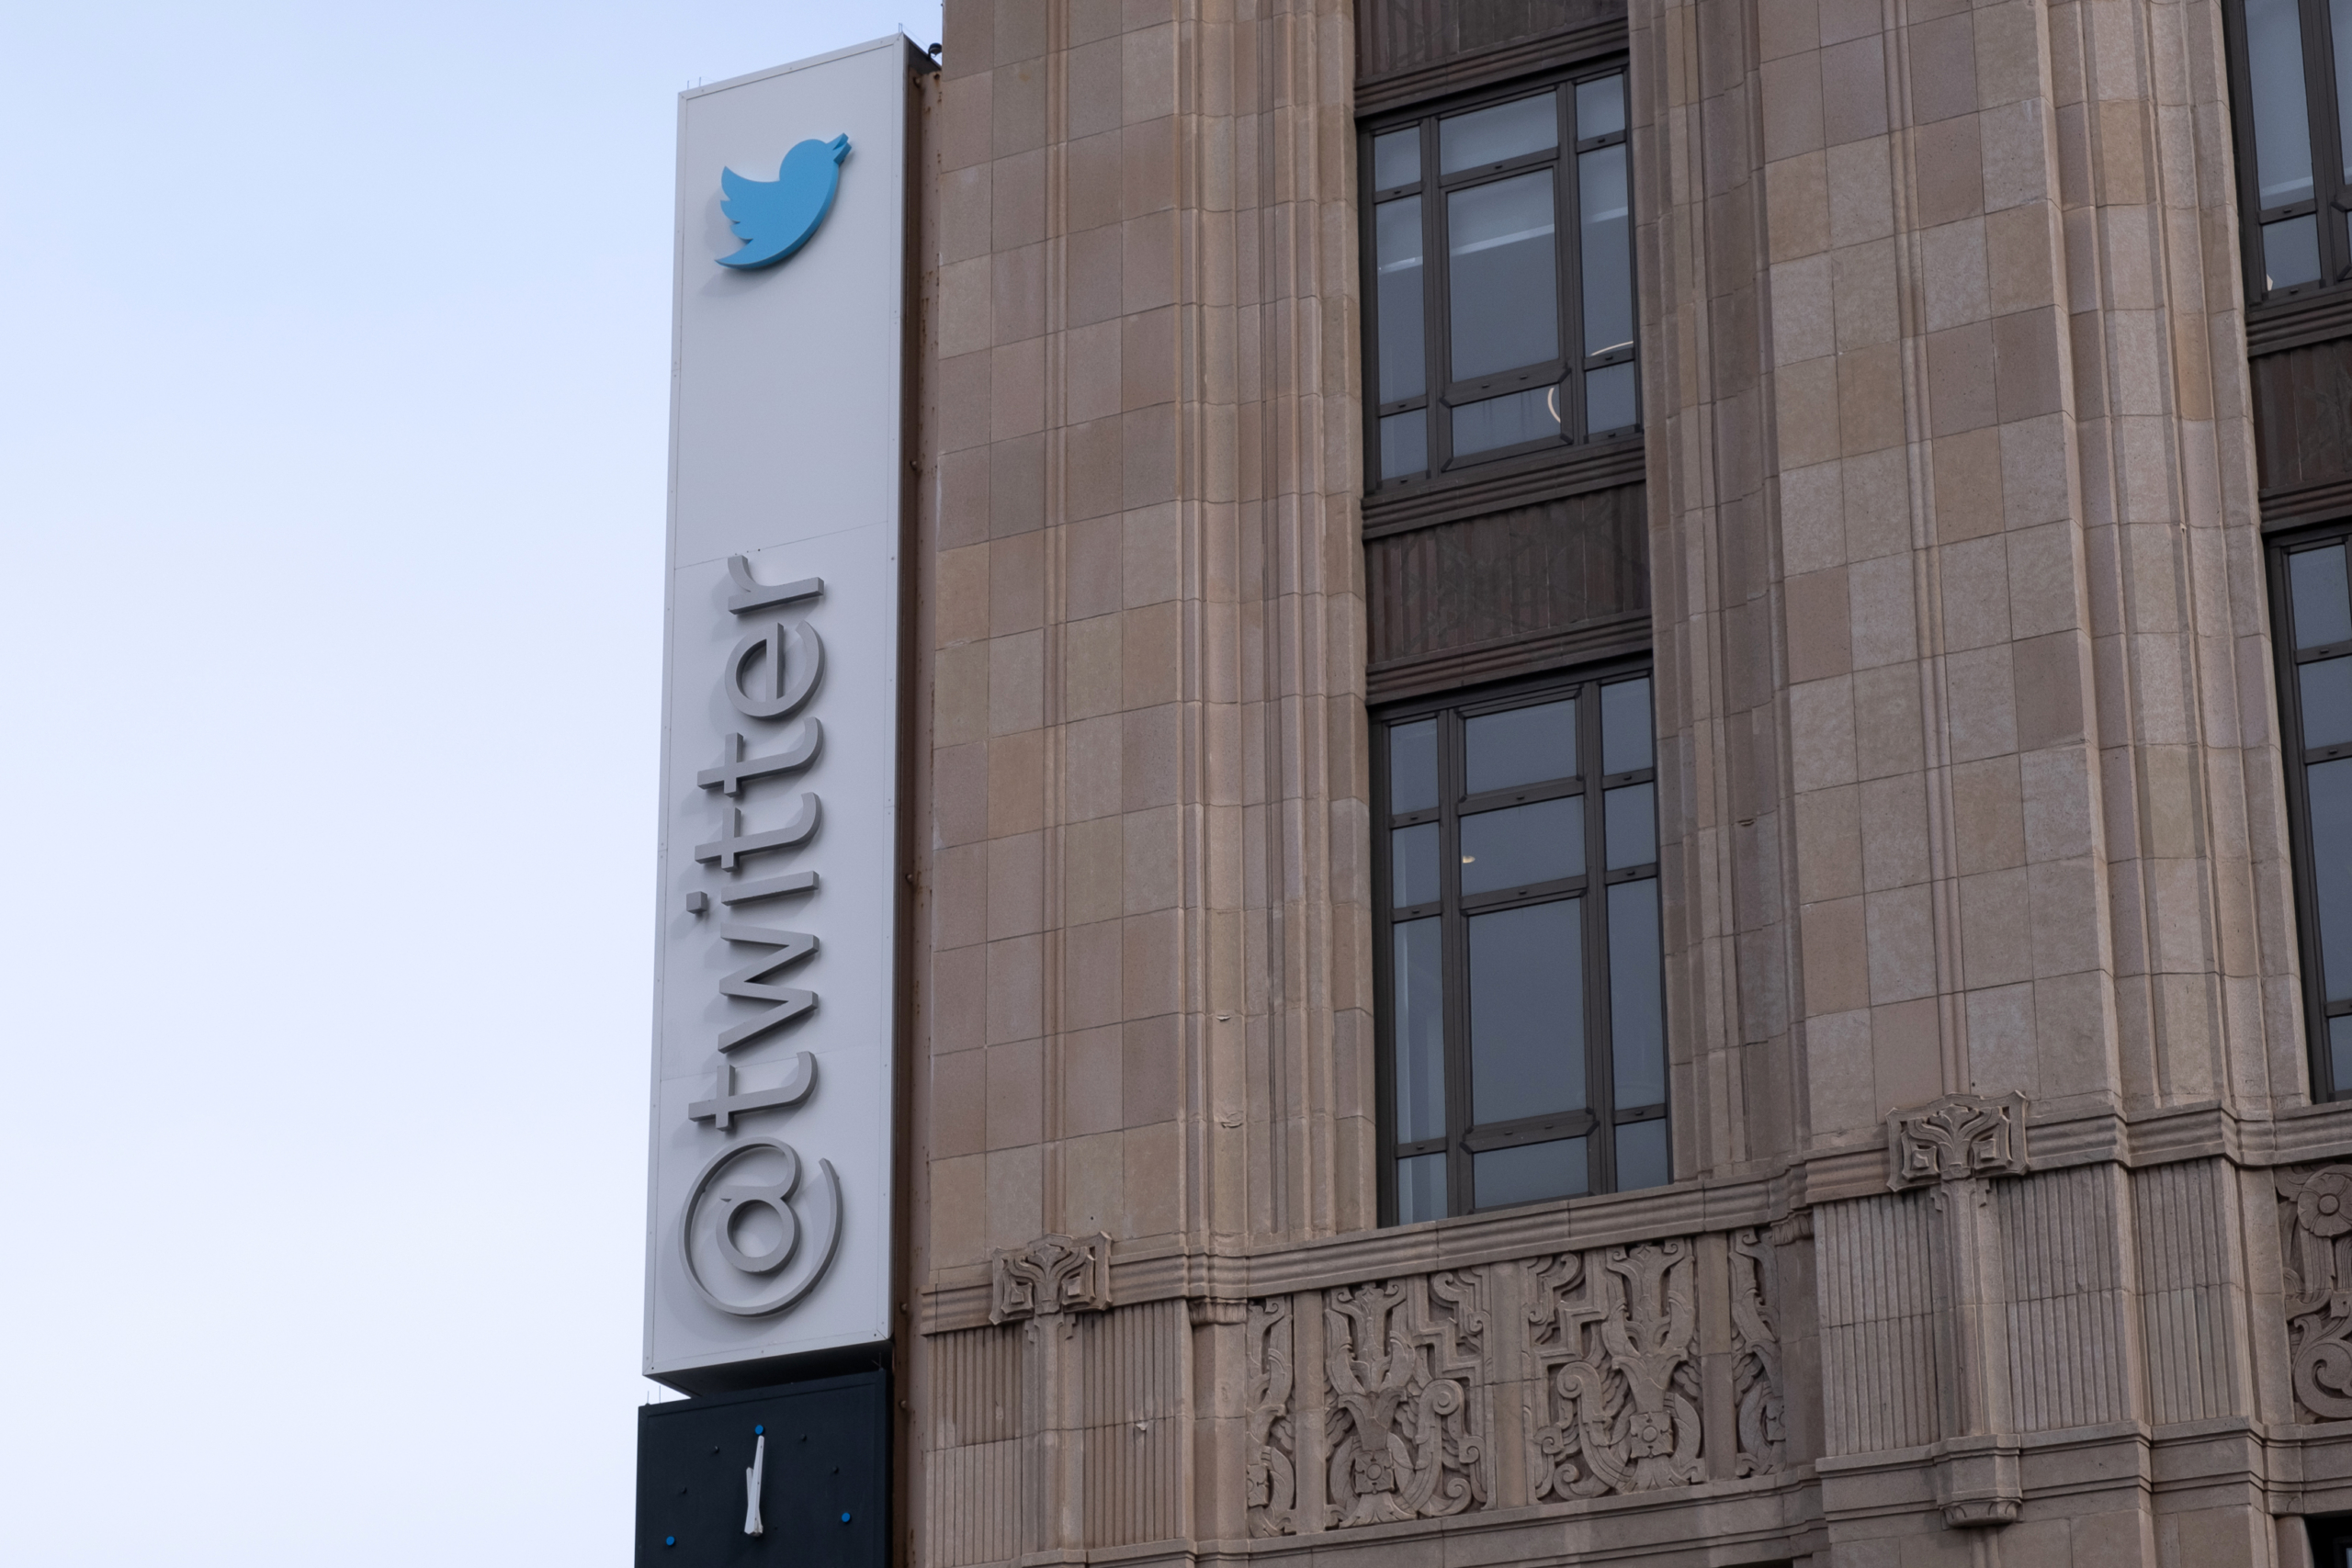 Twitter Launches $7.99 Monthly Subscription Service, Certain Users Get Discount